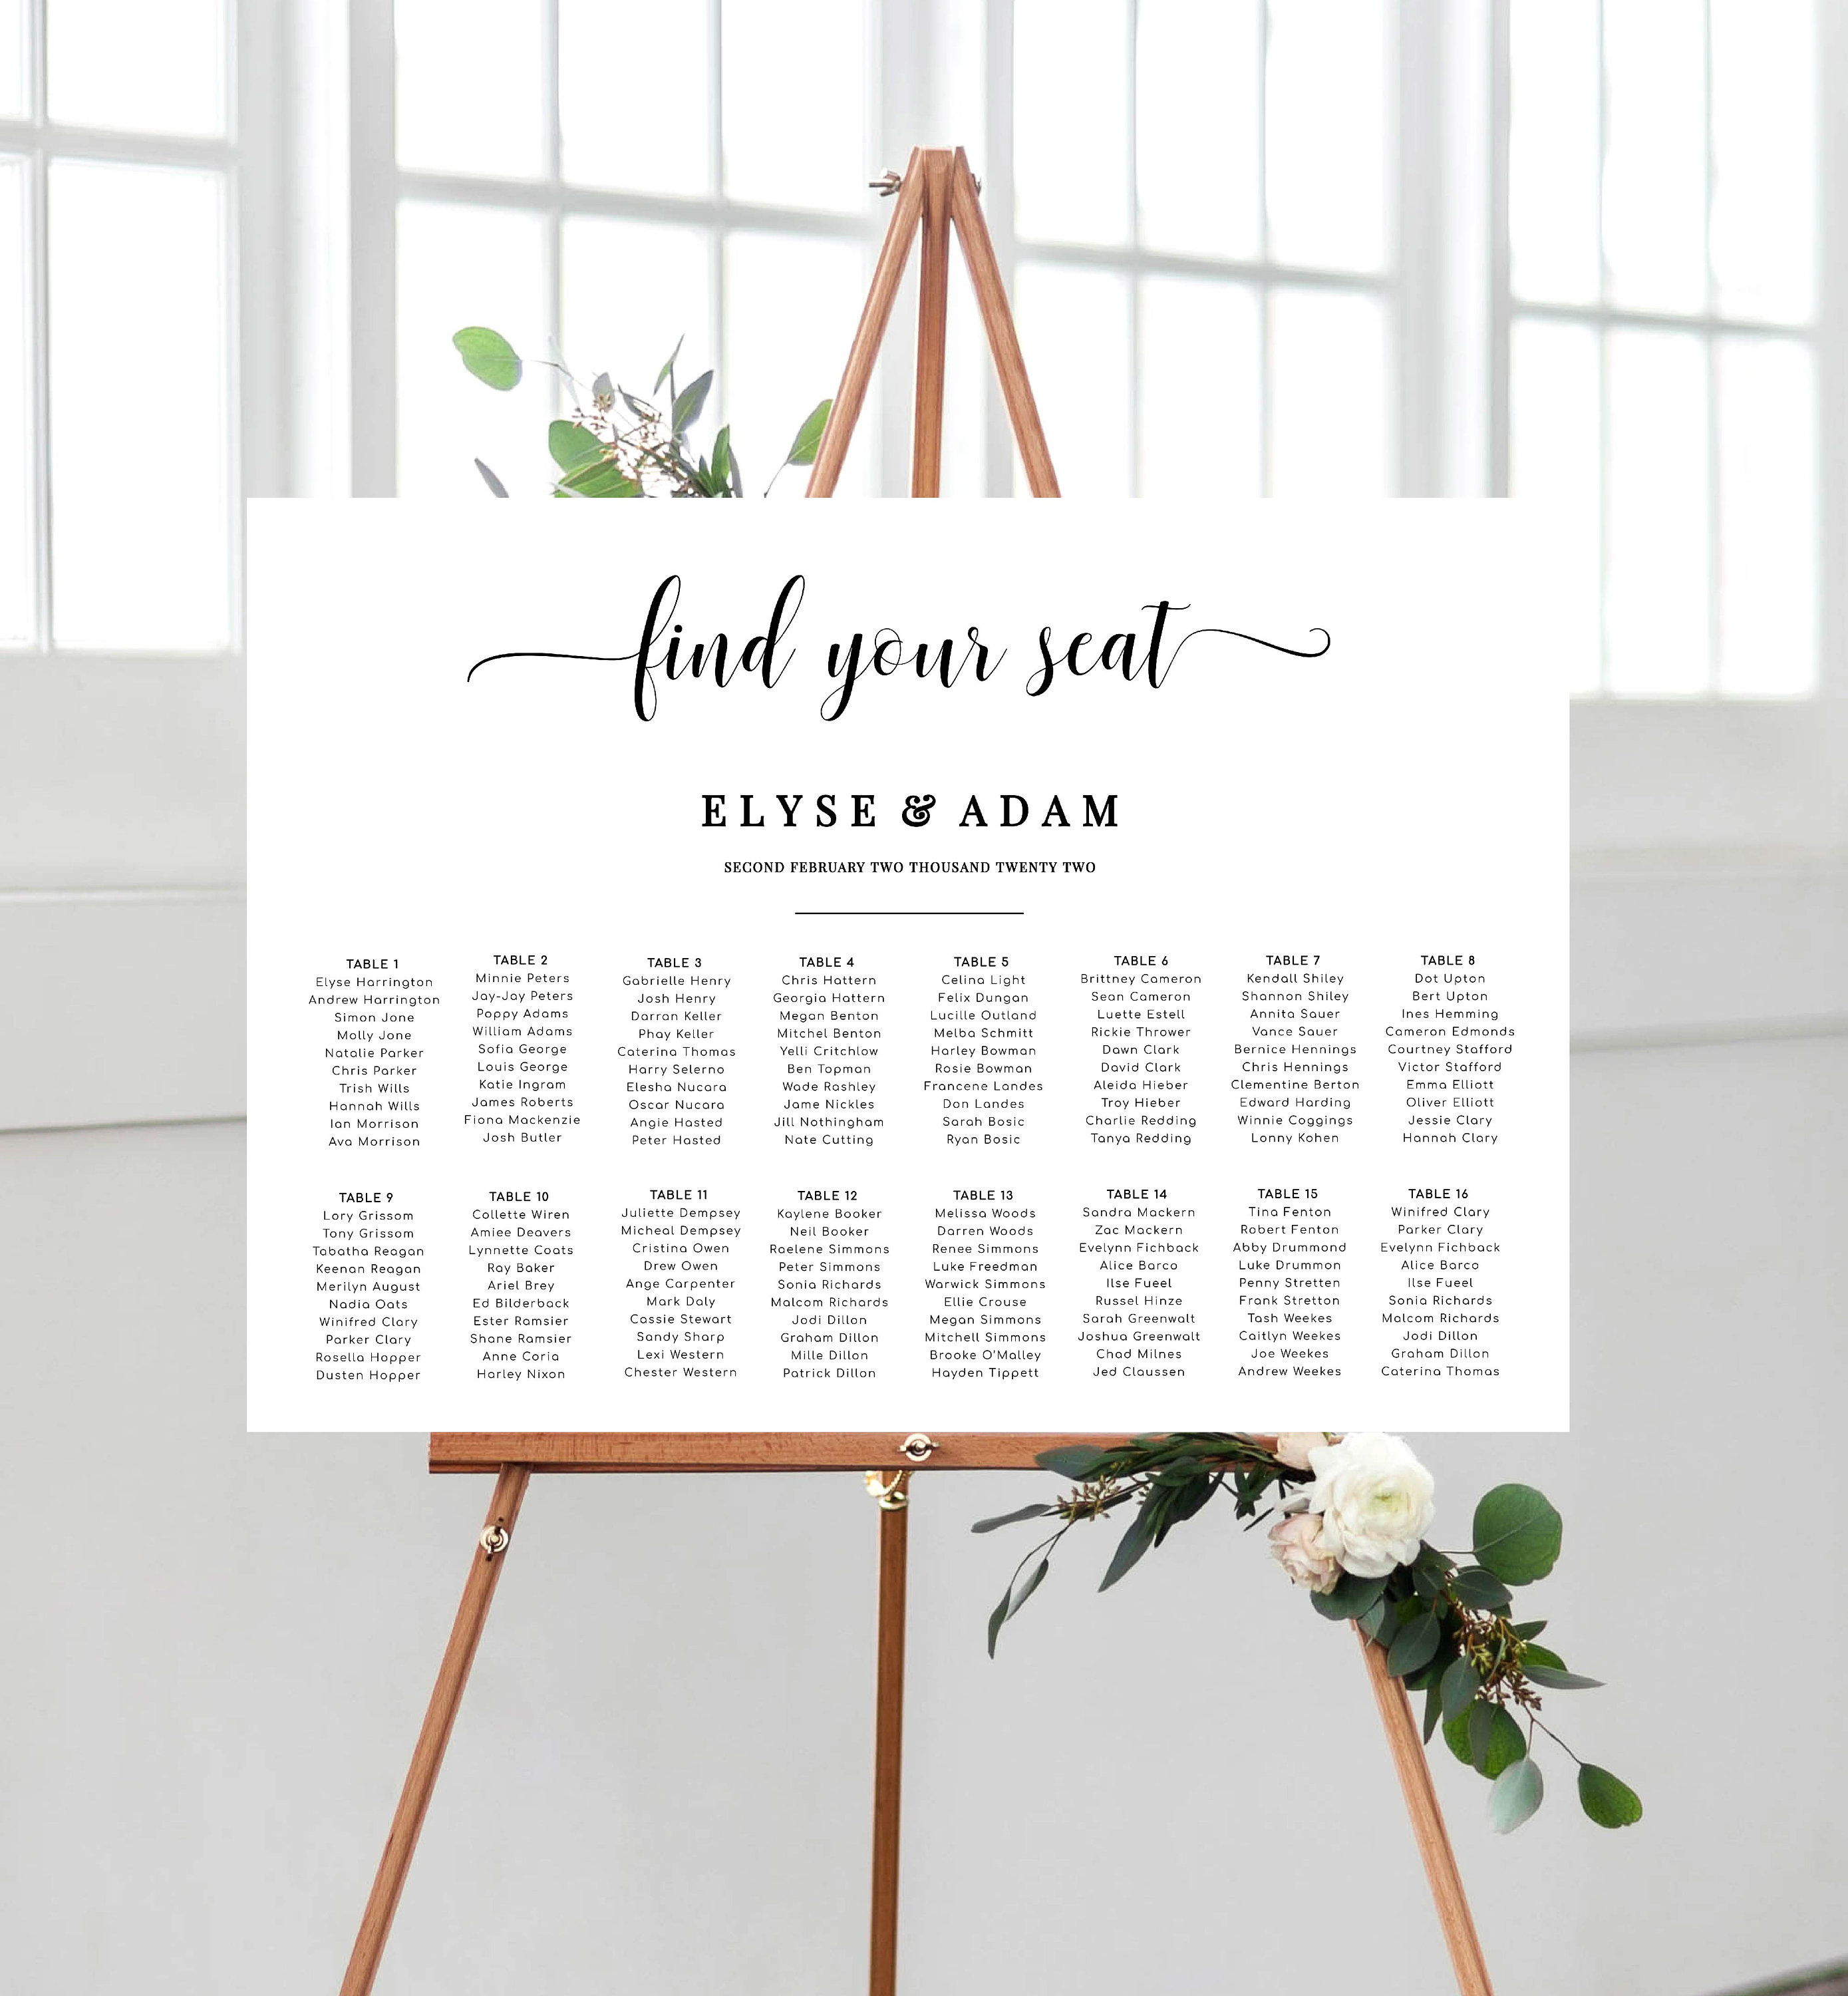 Grab Your Name Find Your Table and Take A Seat Wedding 